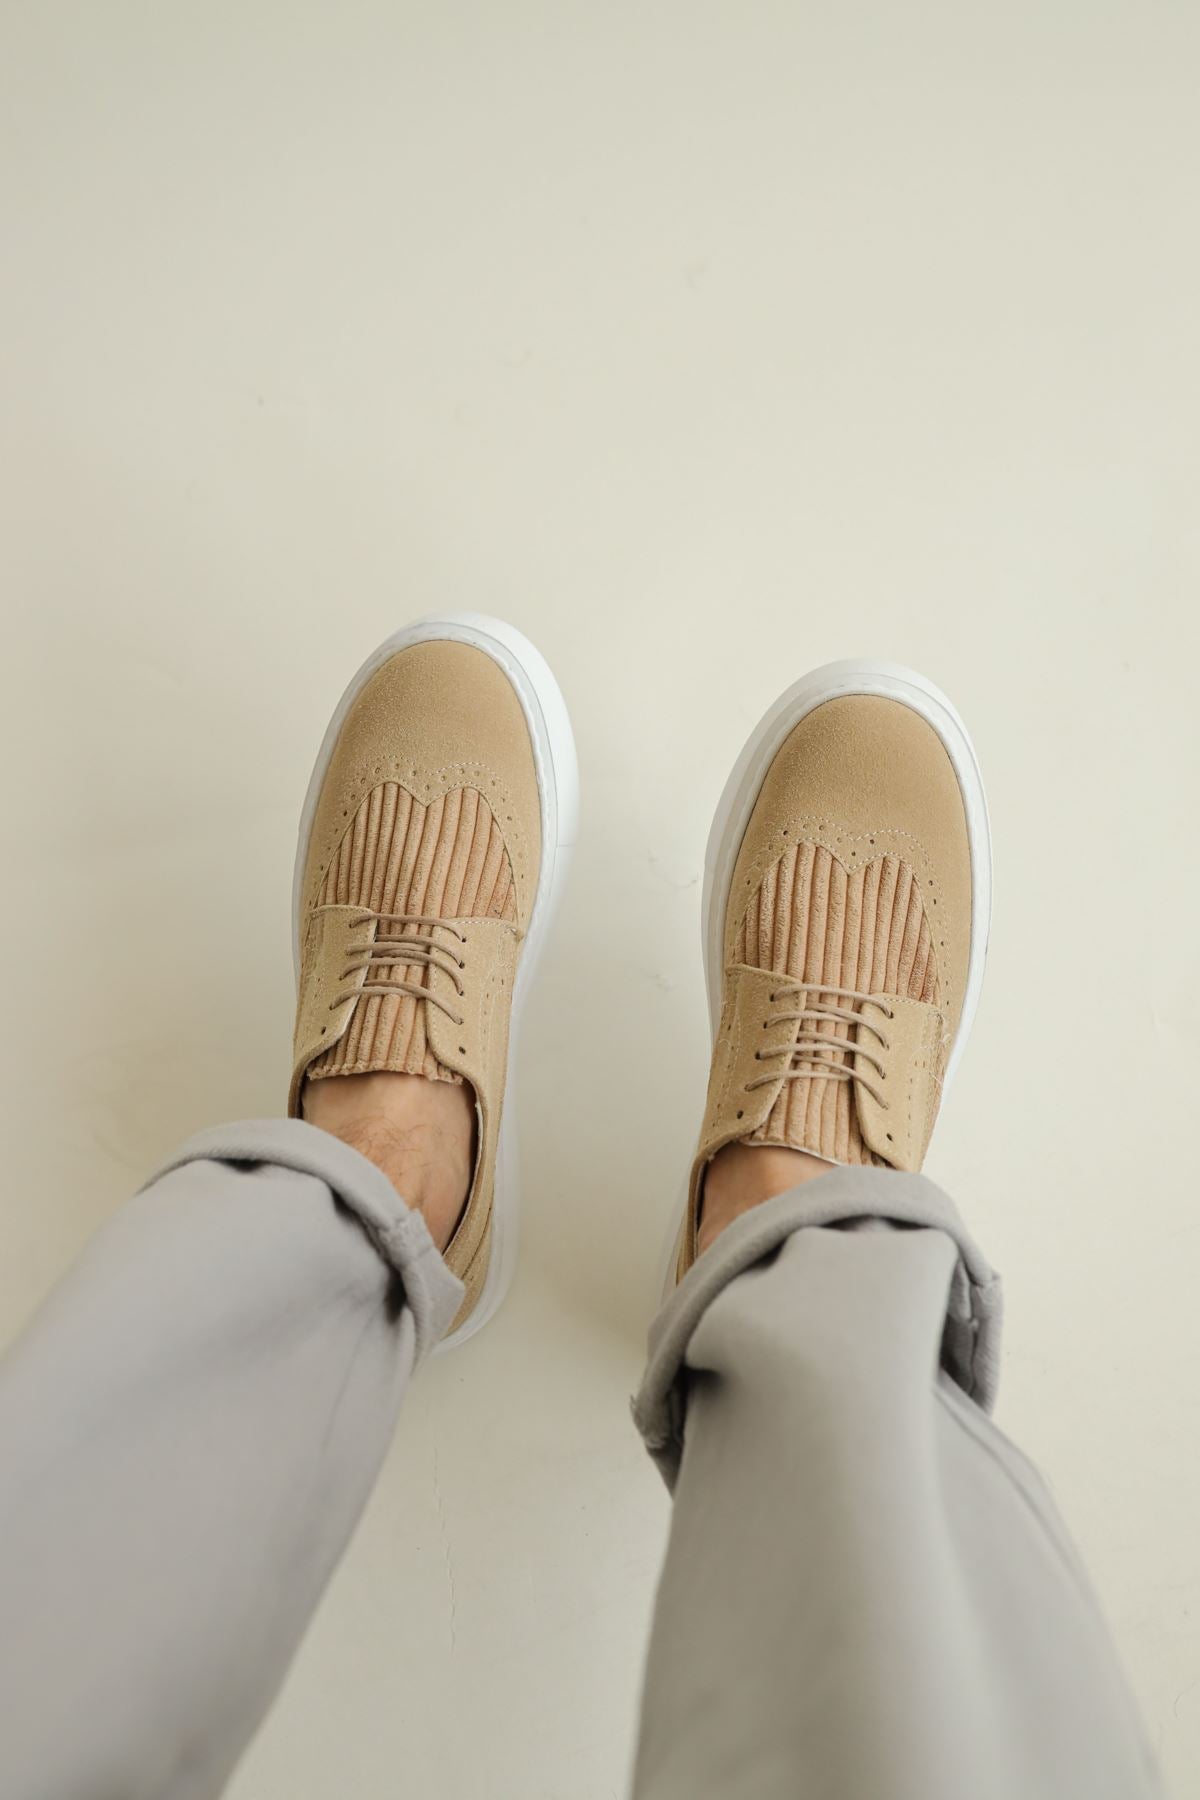 CH149 Suede Men's Shoes SAND - STREETMODE ™